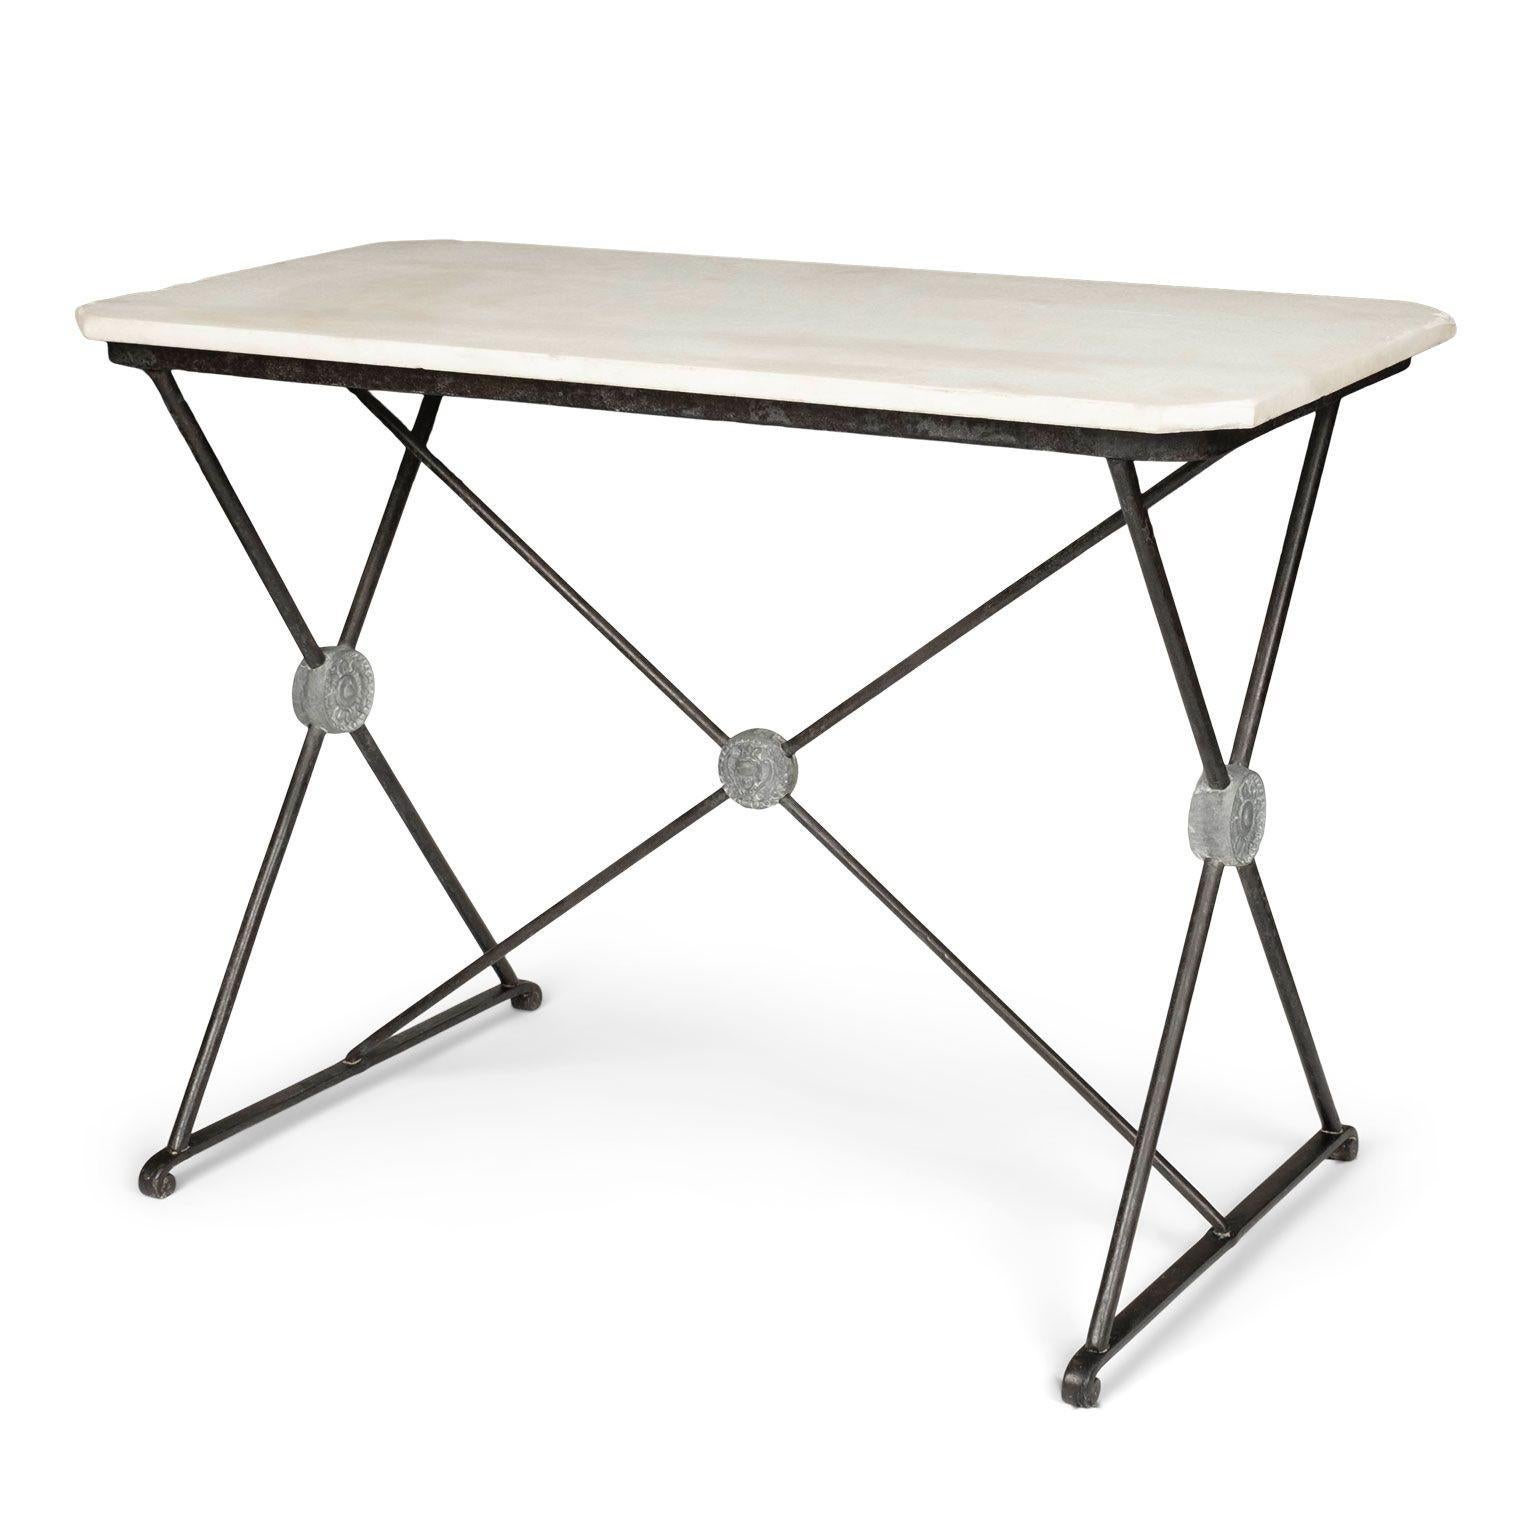 French Provincial White Marble Top Iron Table For Sale